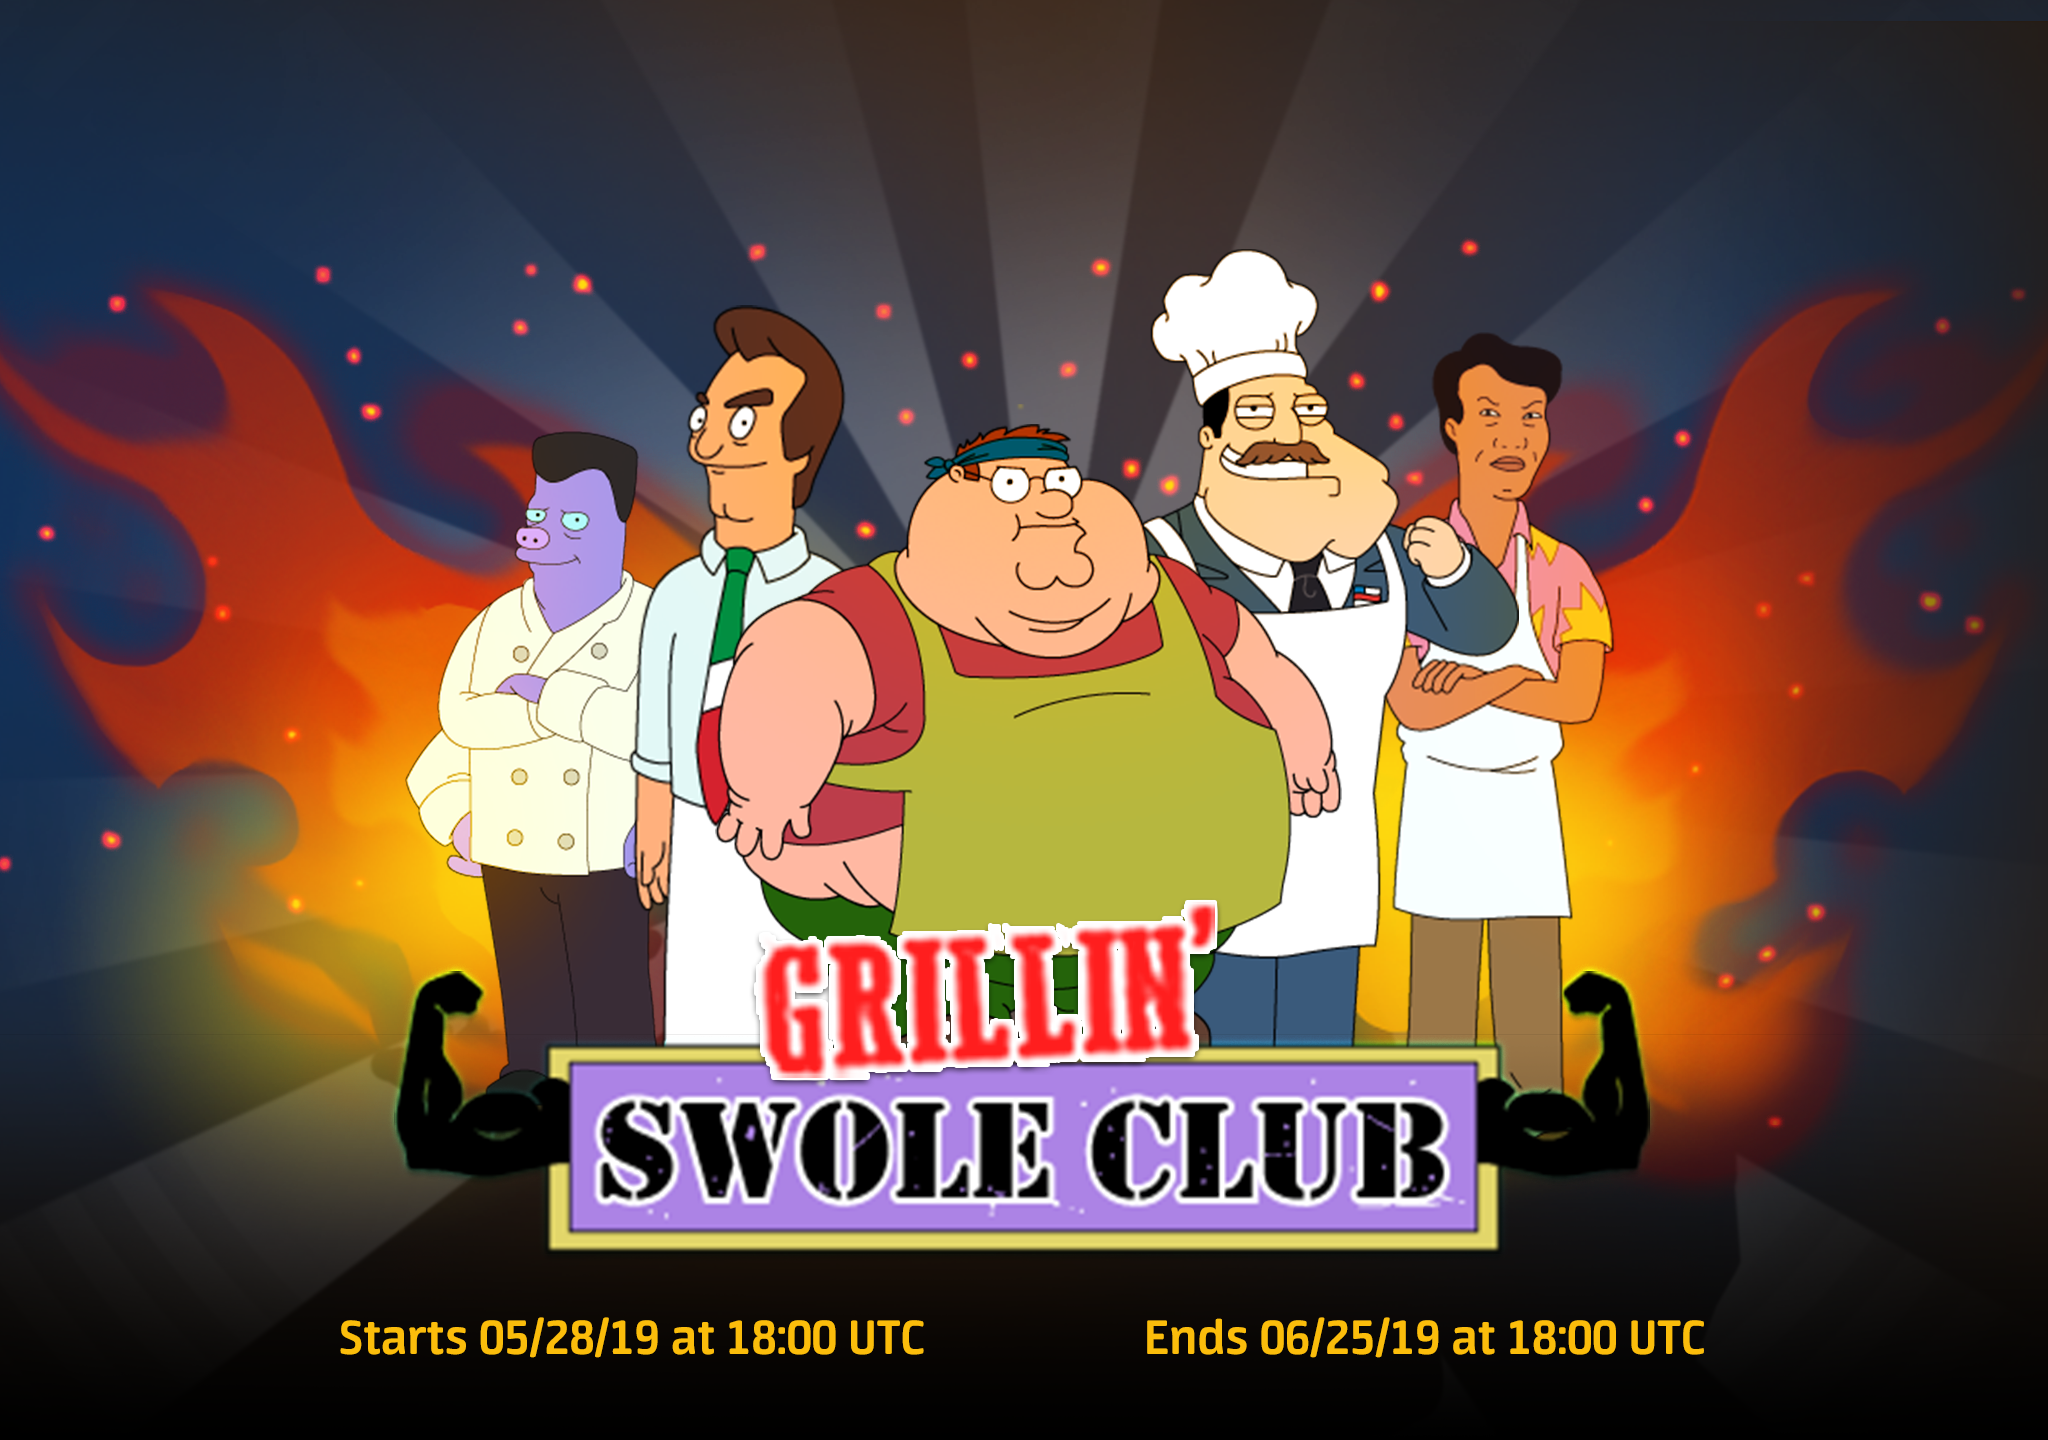 Steam :: Animation Throwdown: The Quest for Cards :: 🍖🍔 The Grillin'  Swole Club Event starts 5/28!